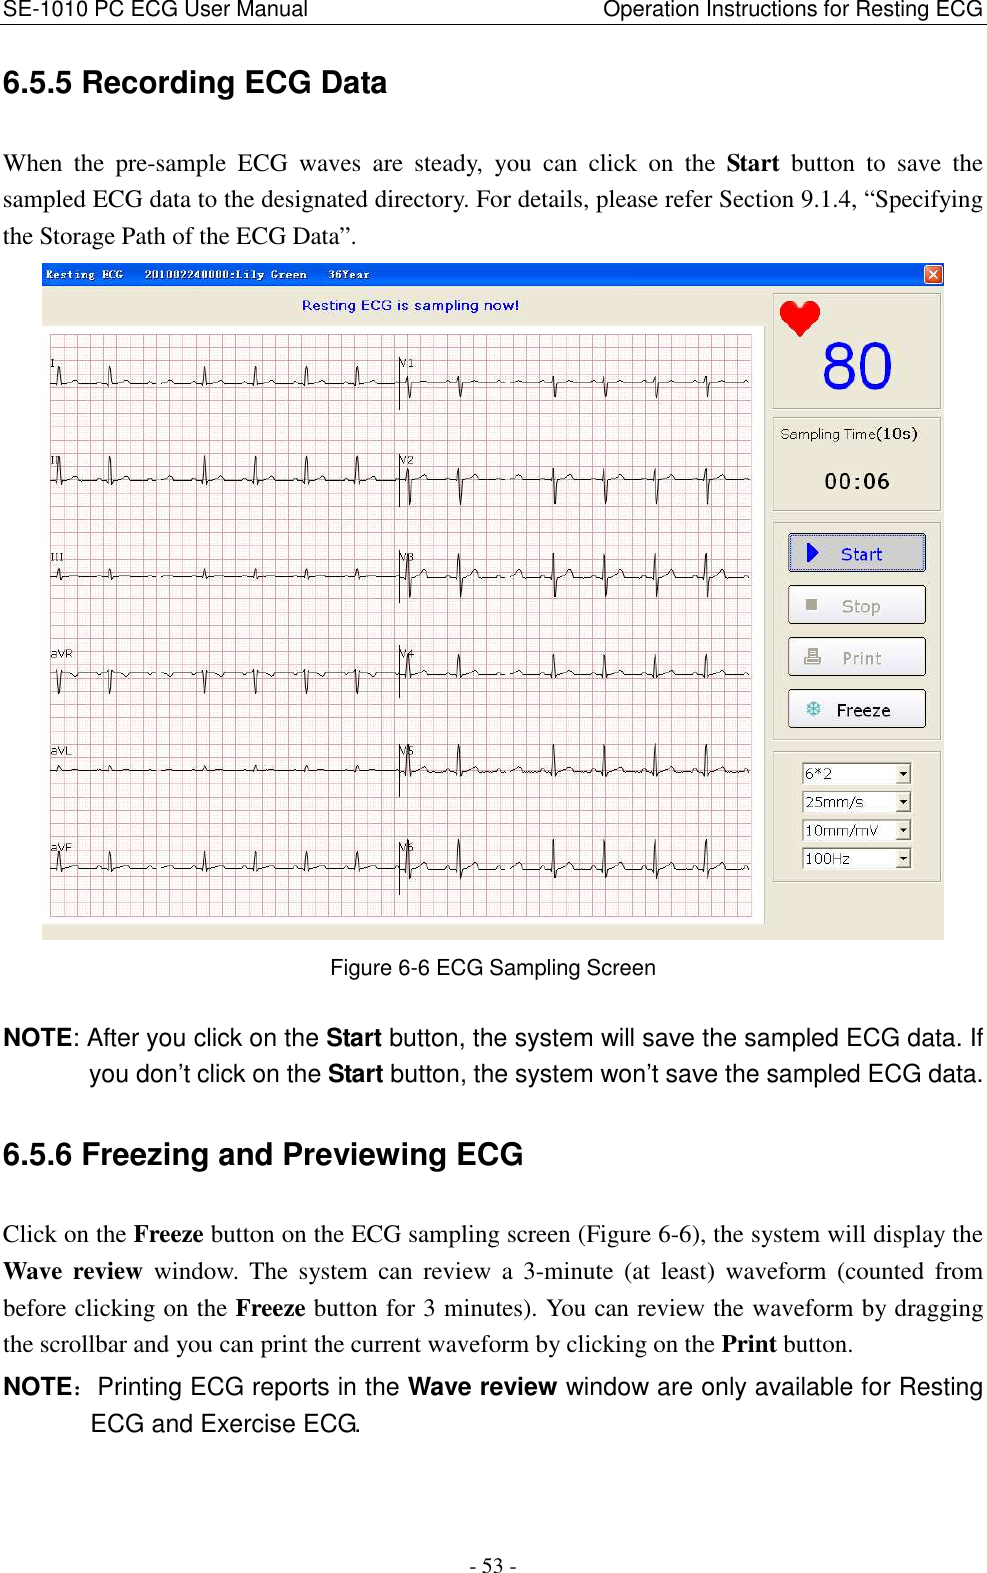 SE-1010 PC ECG User Manual                                                      Operation Instructions for Resting ECG - 53 - 6.5.5 Recording ECG Data When  the  pre-sample  ECG  waves  are  steady,  you  can  click  on  the  Start  button  to  save  the sampled ECG data to the designated directory. For details, please refer Section 9.1.4, “Specifying the Storage Path of the ECG Data”.  Figure 6-6 ECG Sampling Screen NOTE: After you click on the Start button, the system will save the sampled ECG data. If you don’t click on the Start button, the system won’t save the sampled ECG data. 6.5.6 Freezing and Previewing ECG Click on the Freeze button on the ECG sampling screen (Figure 6-6), the system will display the Wave review  window.  The  system  can  review  a  3-minute  (at  least)  waveform  (counted  from before clicking on the Freeze button for 3 minutes). You can review the waveform by dragging the scrollbar and you can print the current waveform by clicking on the Print button.     NOTE：Printing ECG reports in the Wave review window are only available for Resting ECG and Exercise ECG. 